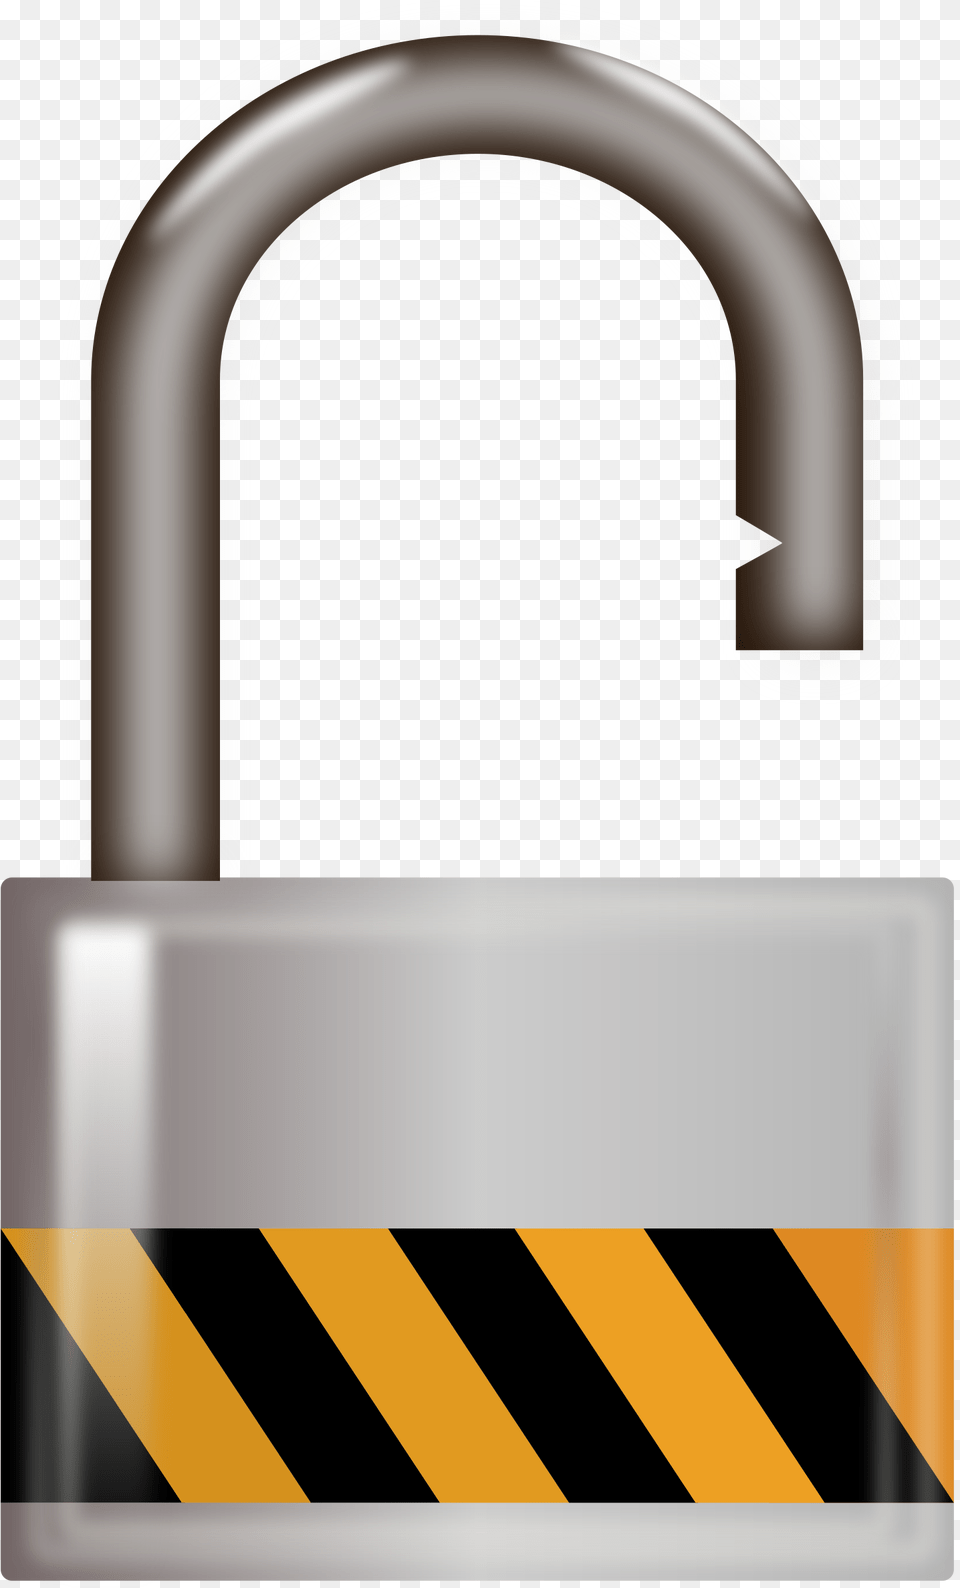 This Icons Design Of Cadenas Ouvert, Mailbox, Lock Png